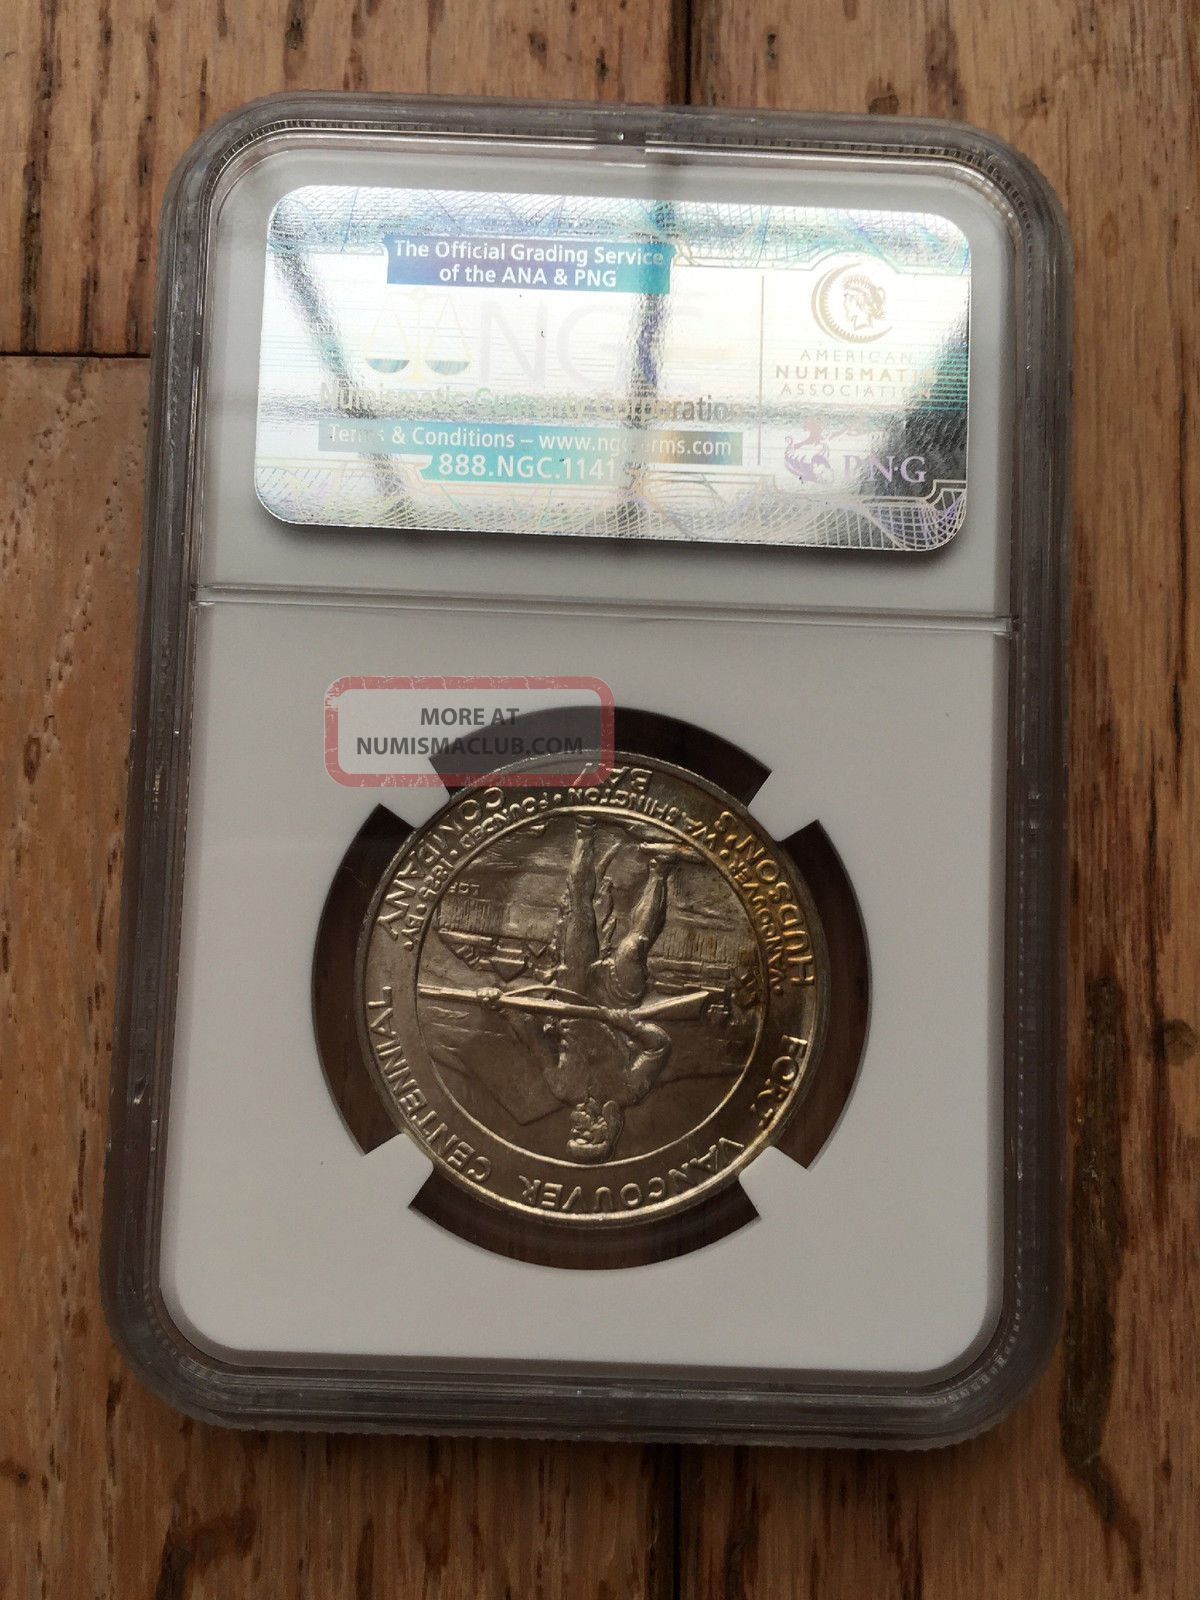 1925 Ngc Ms 65 Fort Vancouver Silver Commemorative